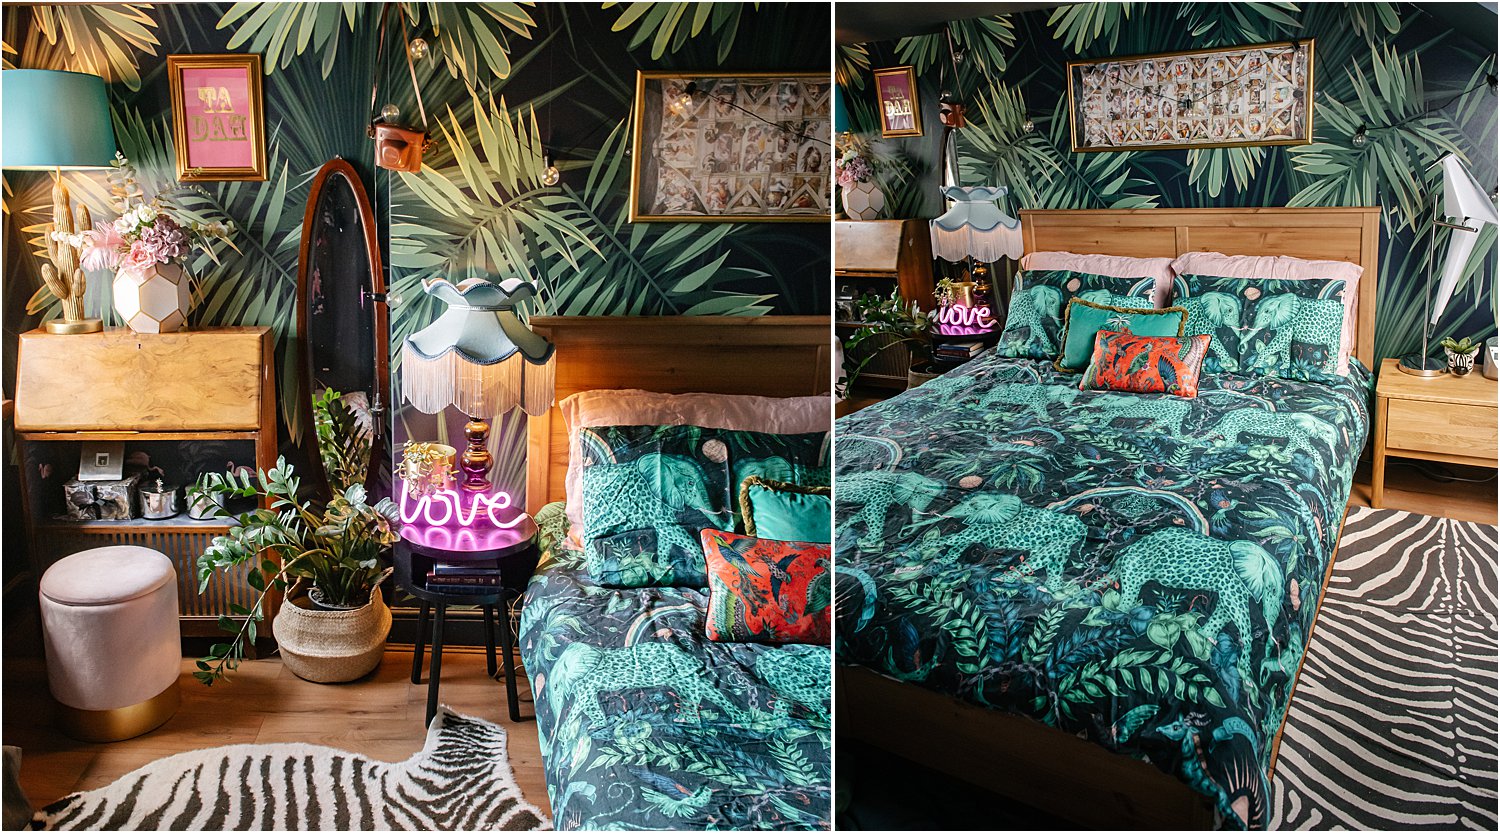 jungle-wallpaper-woodlands-bedroom-nature-dark-eclectic-maximalist-interiors-lily-sawyer-layered-home